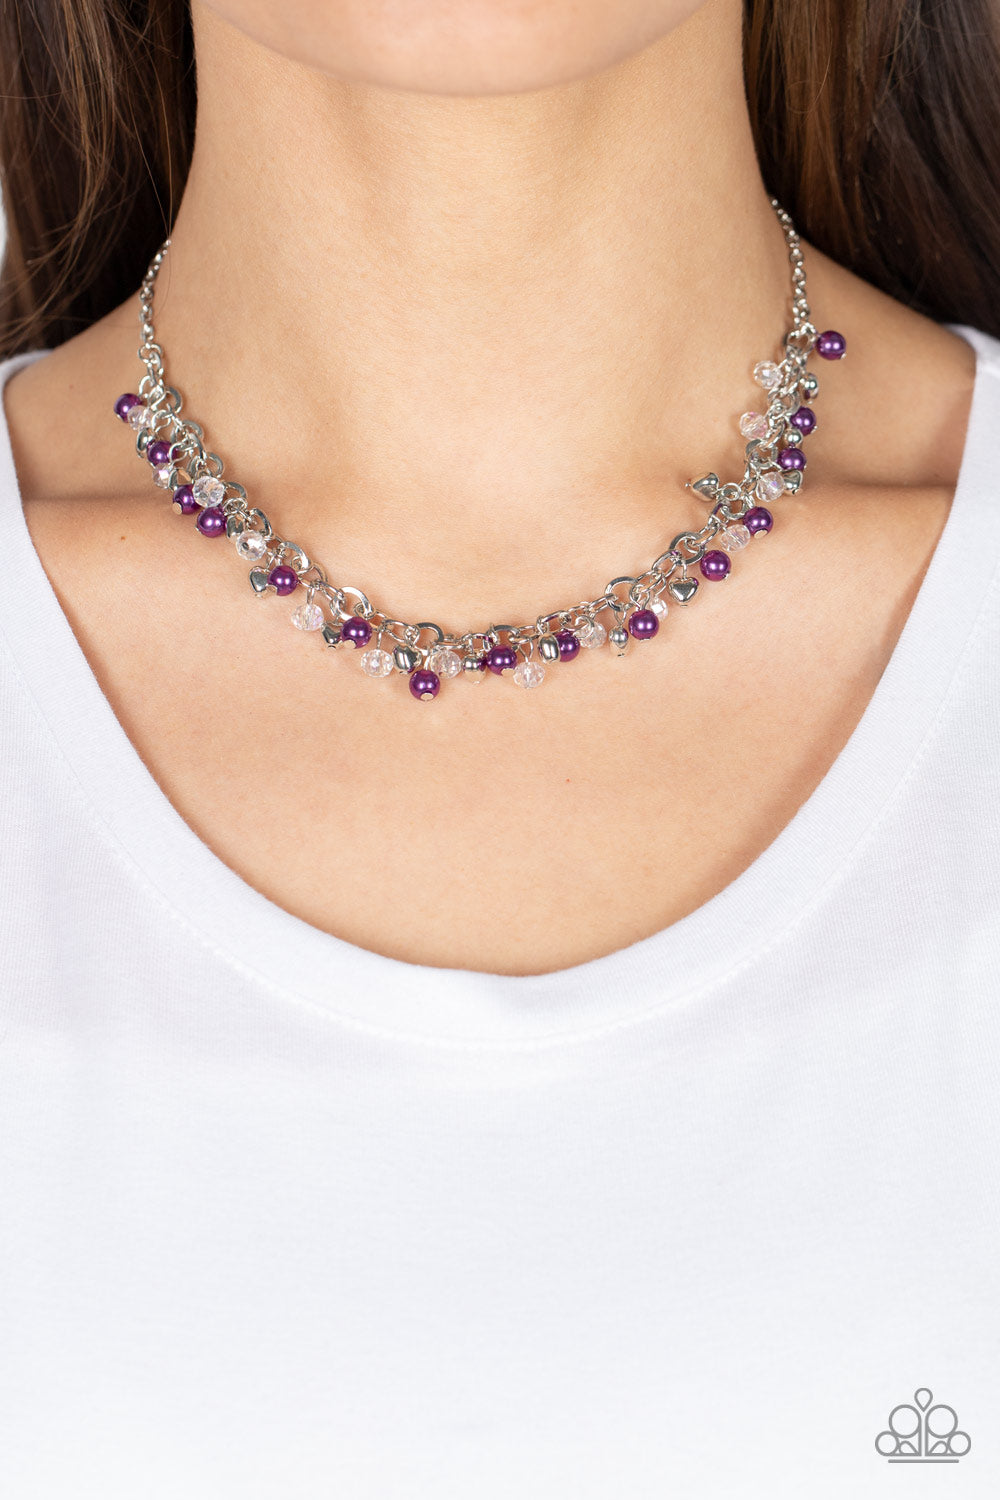 Gallery Gem - Purple Gem Silver Necklace - Paparazzi – Sugar Bee Bling -  Paparazzi Jewelry and Accessories